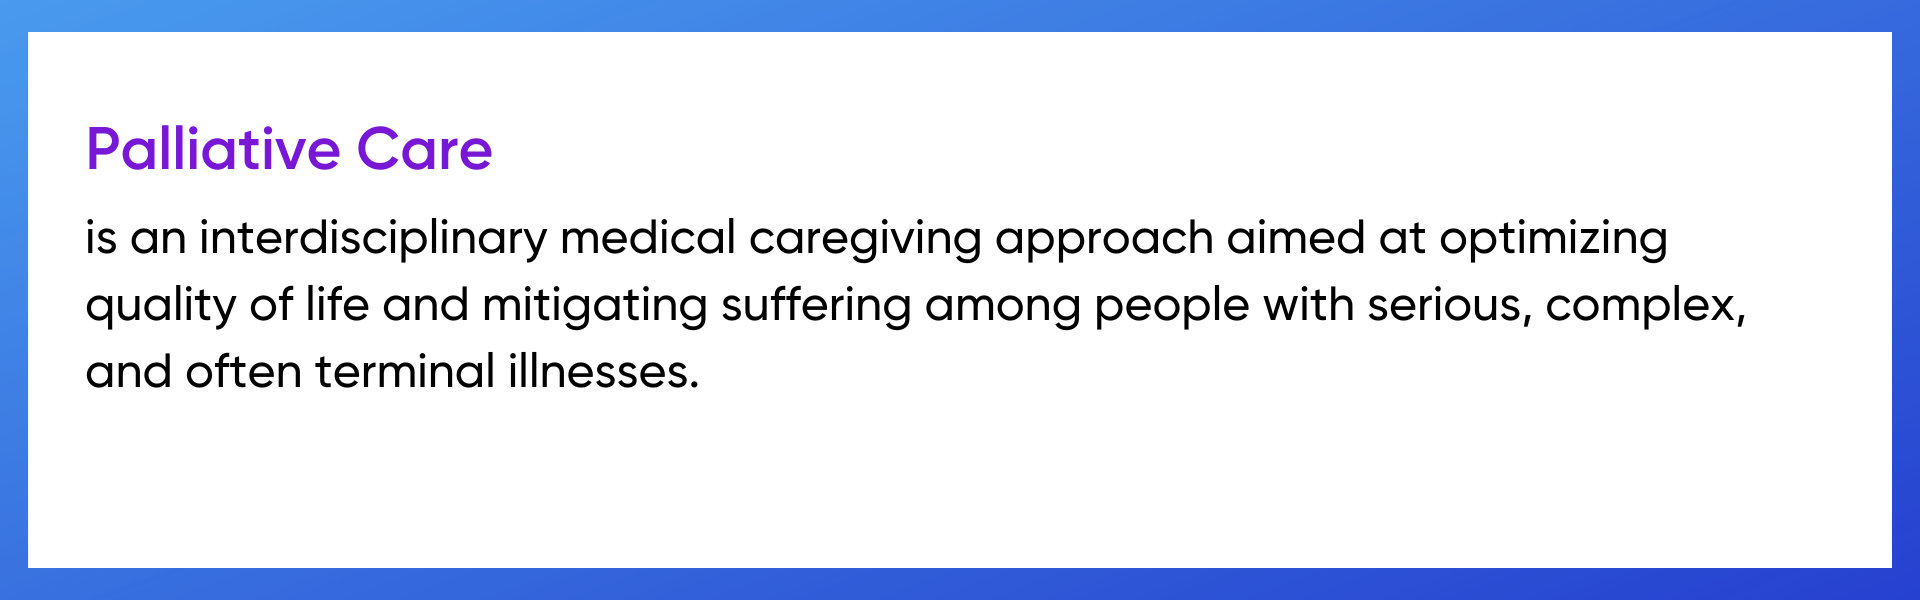 Palliative care is an interdisciplinary medical caregiving approach aimed at optimizing quality of life and mitigating suffering among people with serious, complex, and often terminal illnesses.